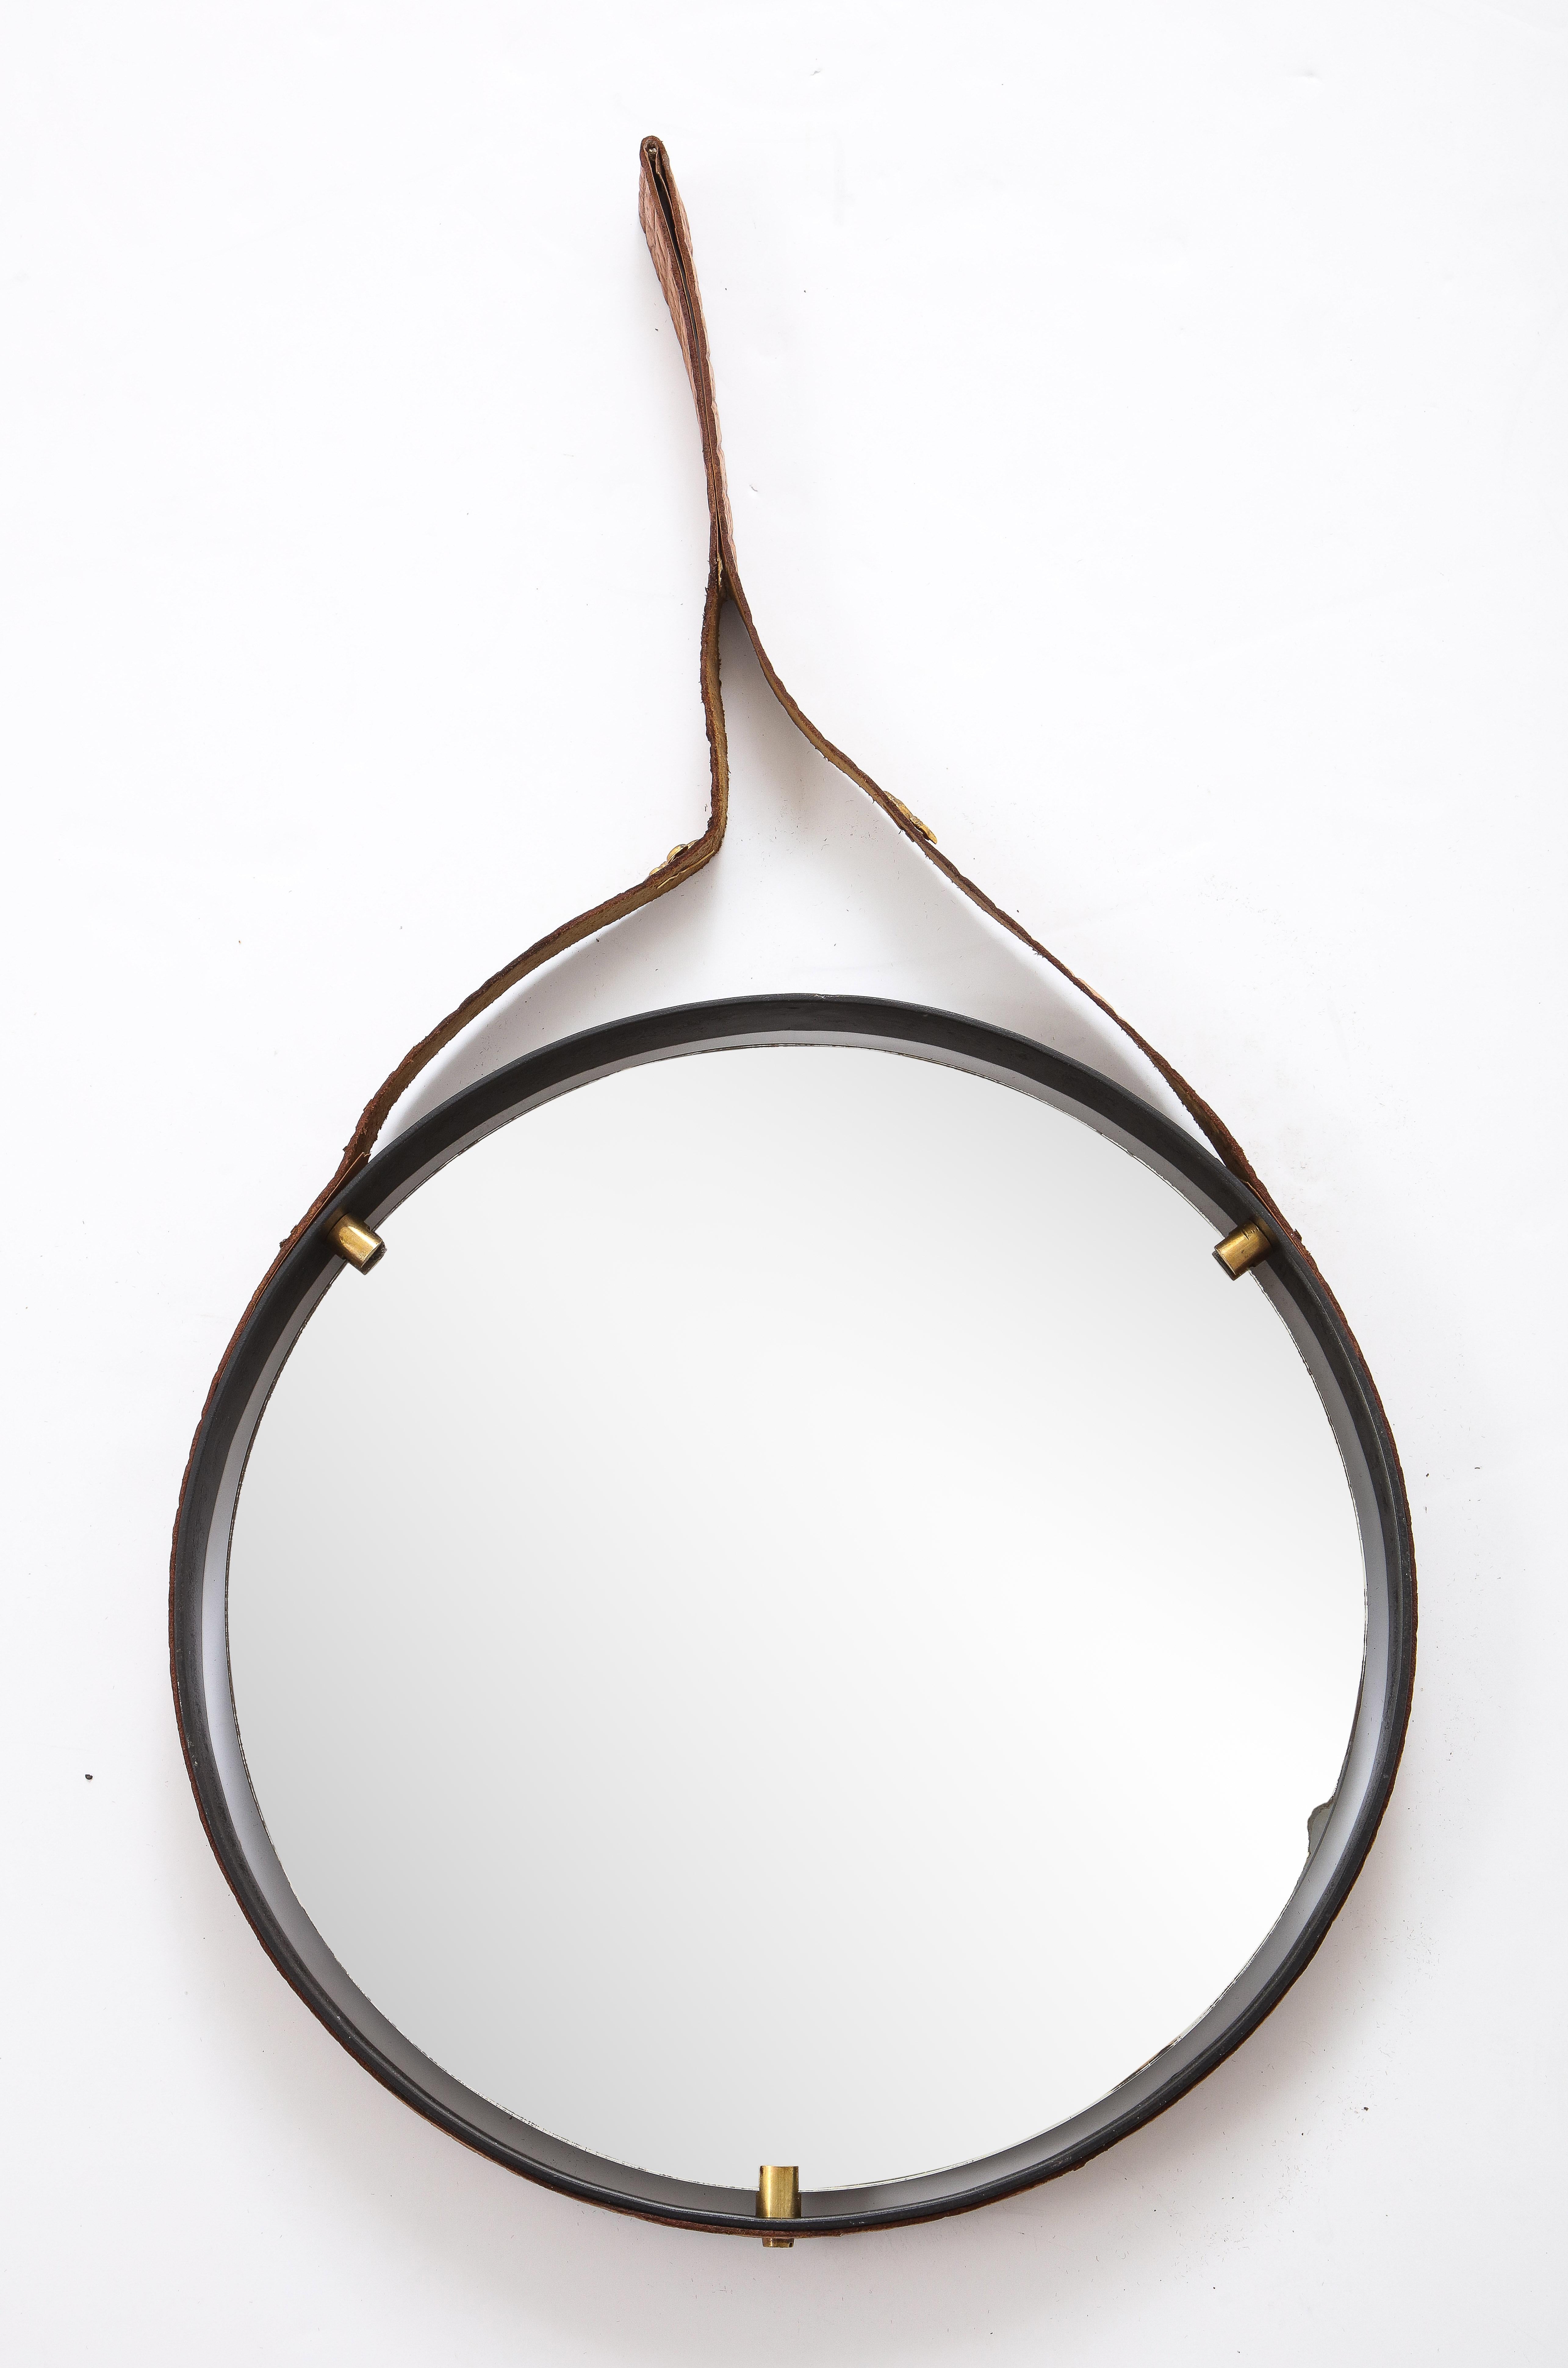 Italian 1960's Circular Floating Mirror with Leather Strap For Sale 2